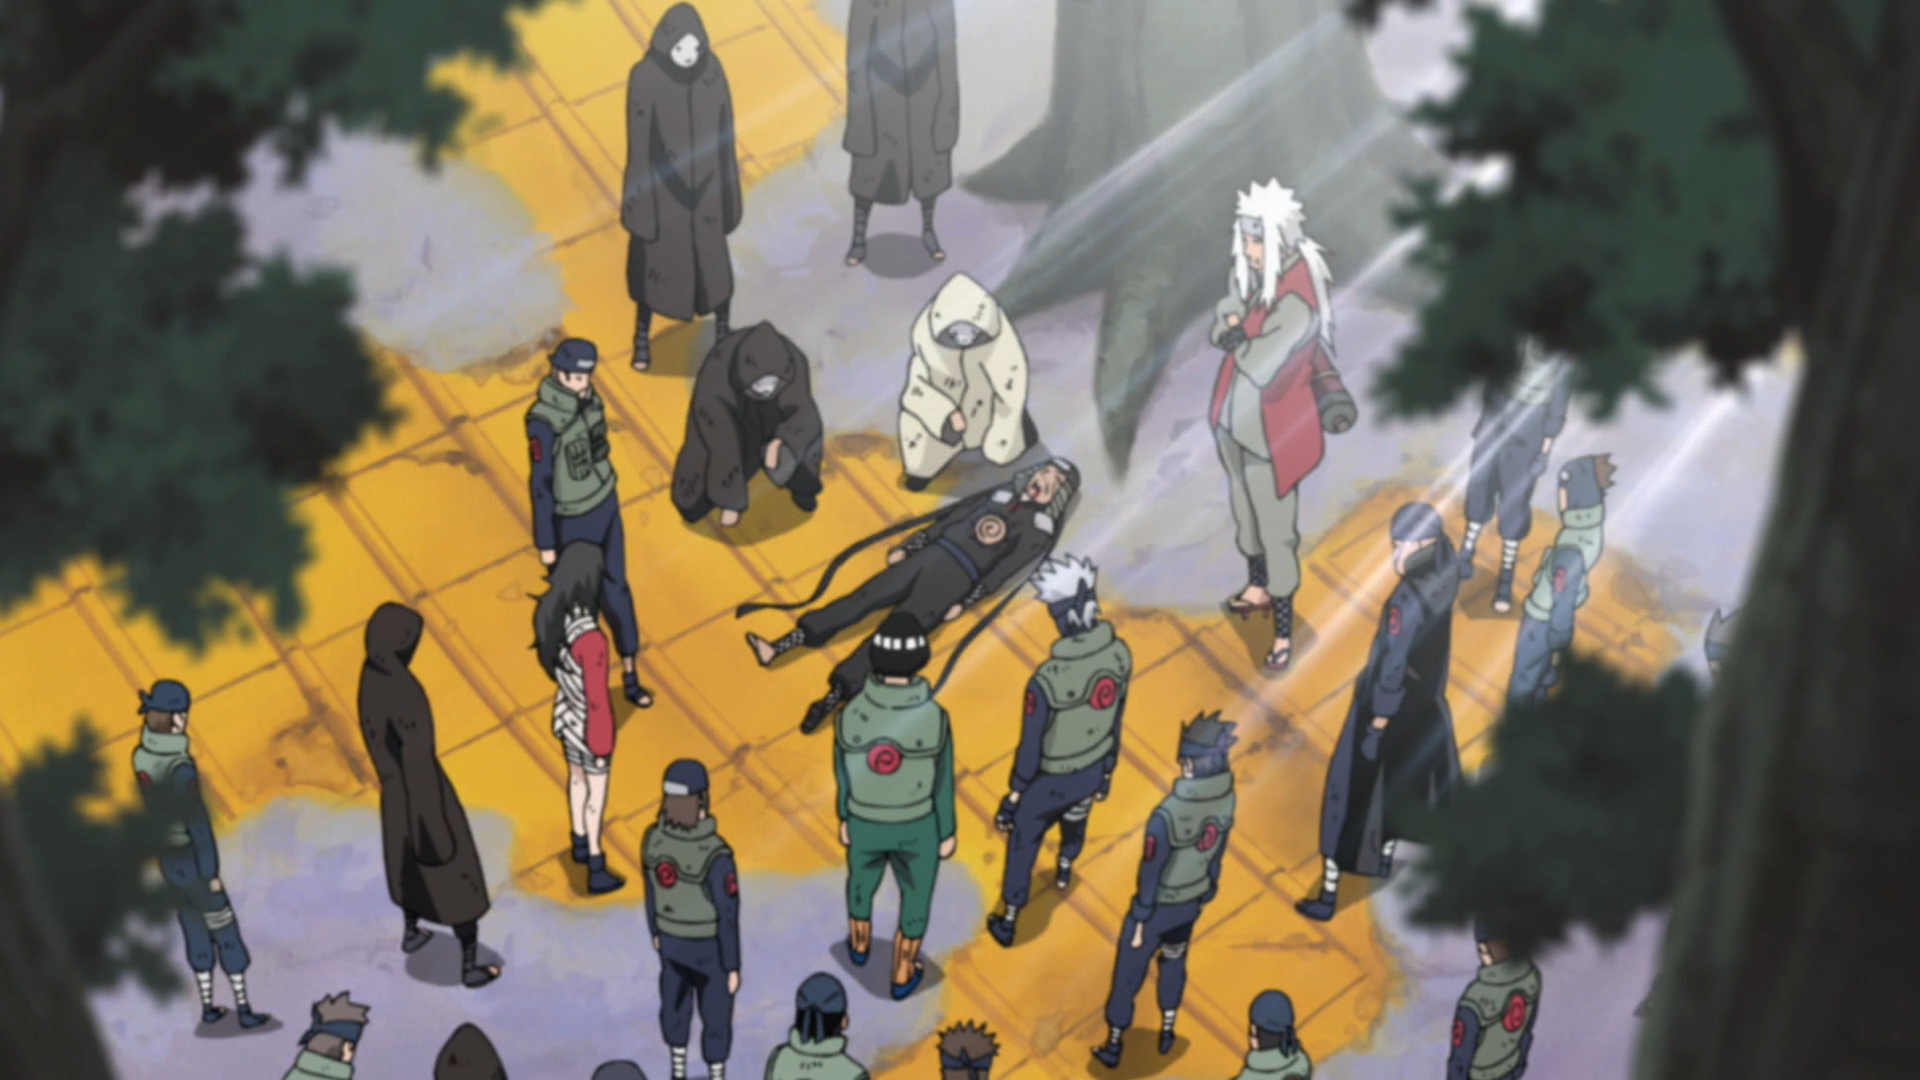 Who was the 3rd Ninja Orochimaru Summoned Against his Fight with